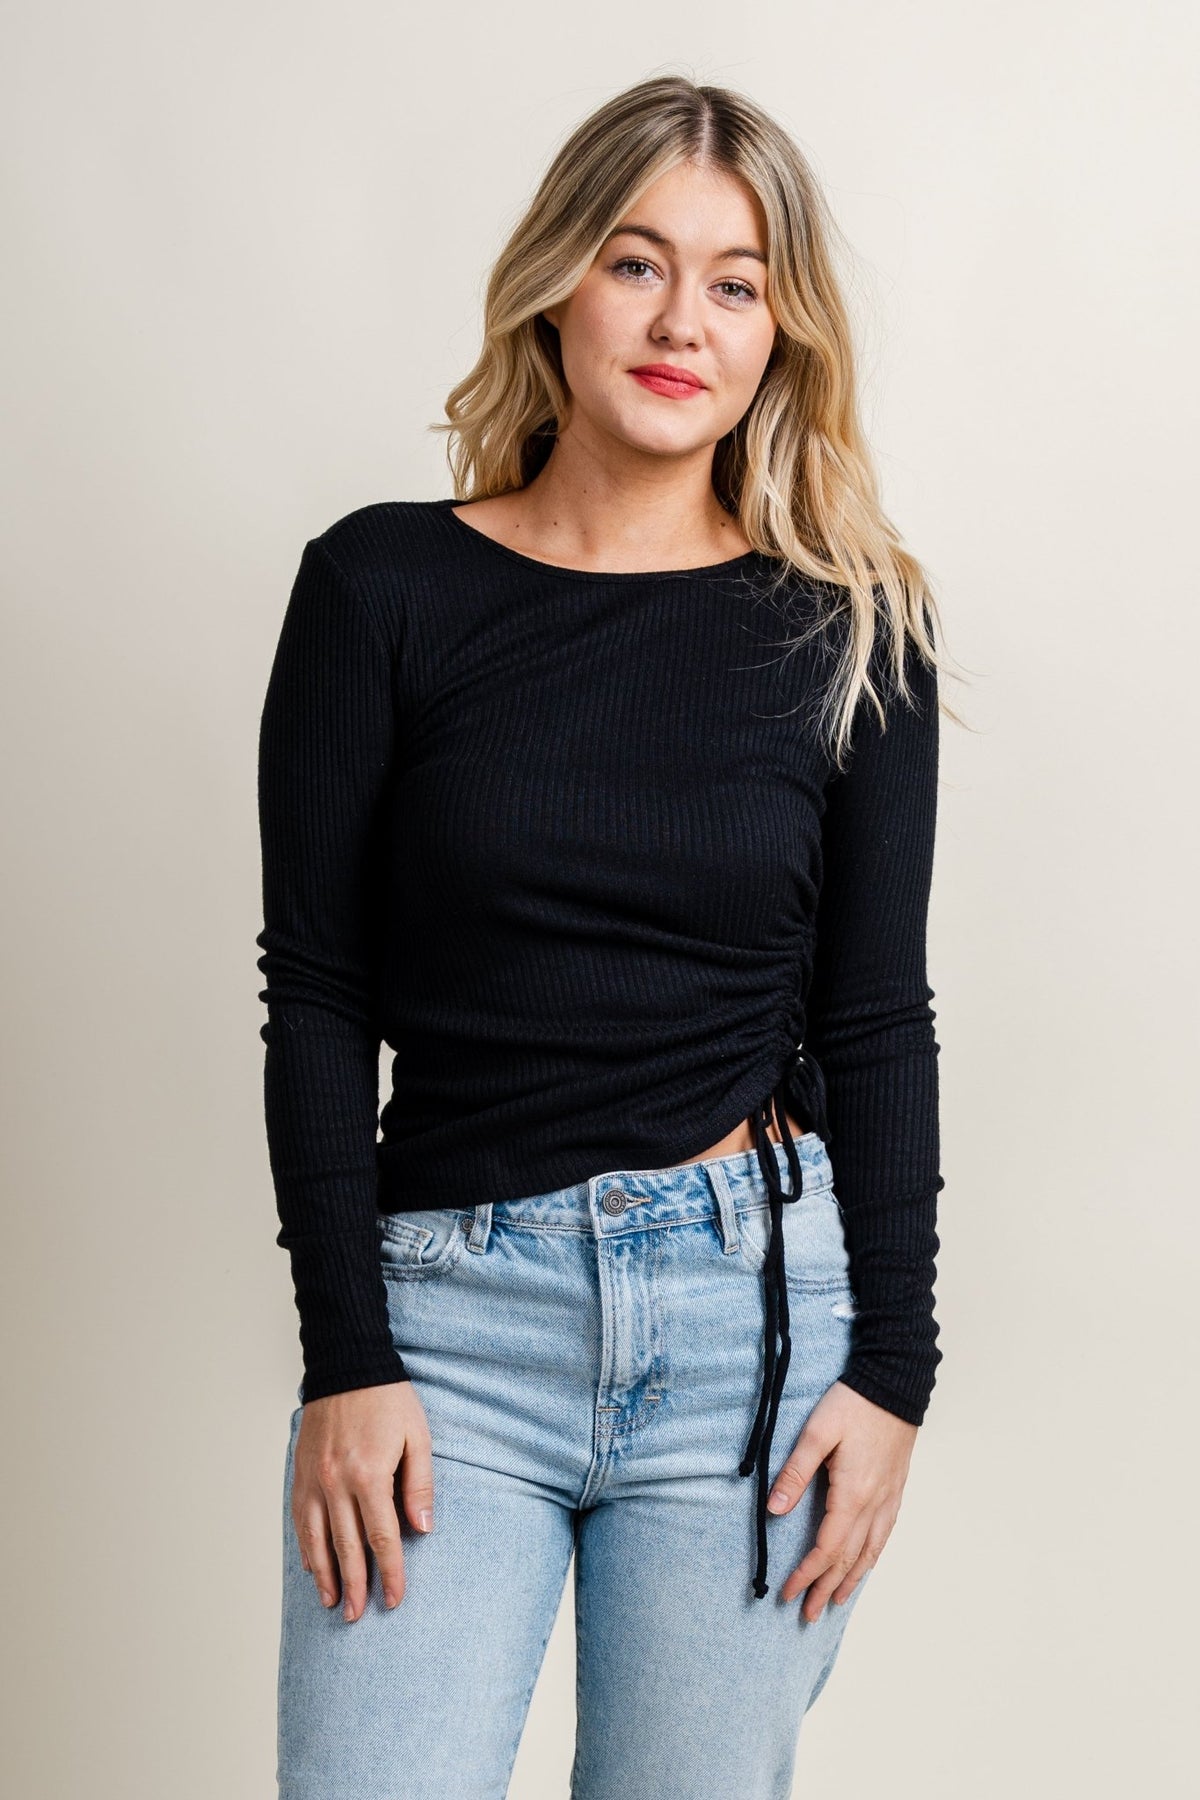 Z Supply damali shirred top black - Z Supply Top - Z Supply Tops, Dresses, Tanks, Tees, Cardigans, Joggers and Loungewear at Lush Fashion Lounge